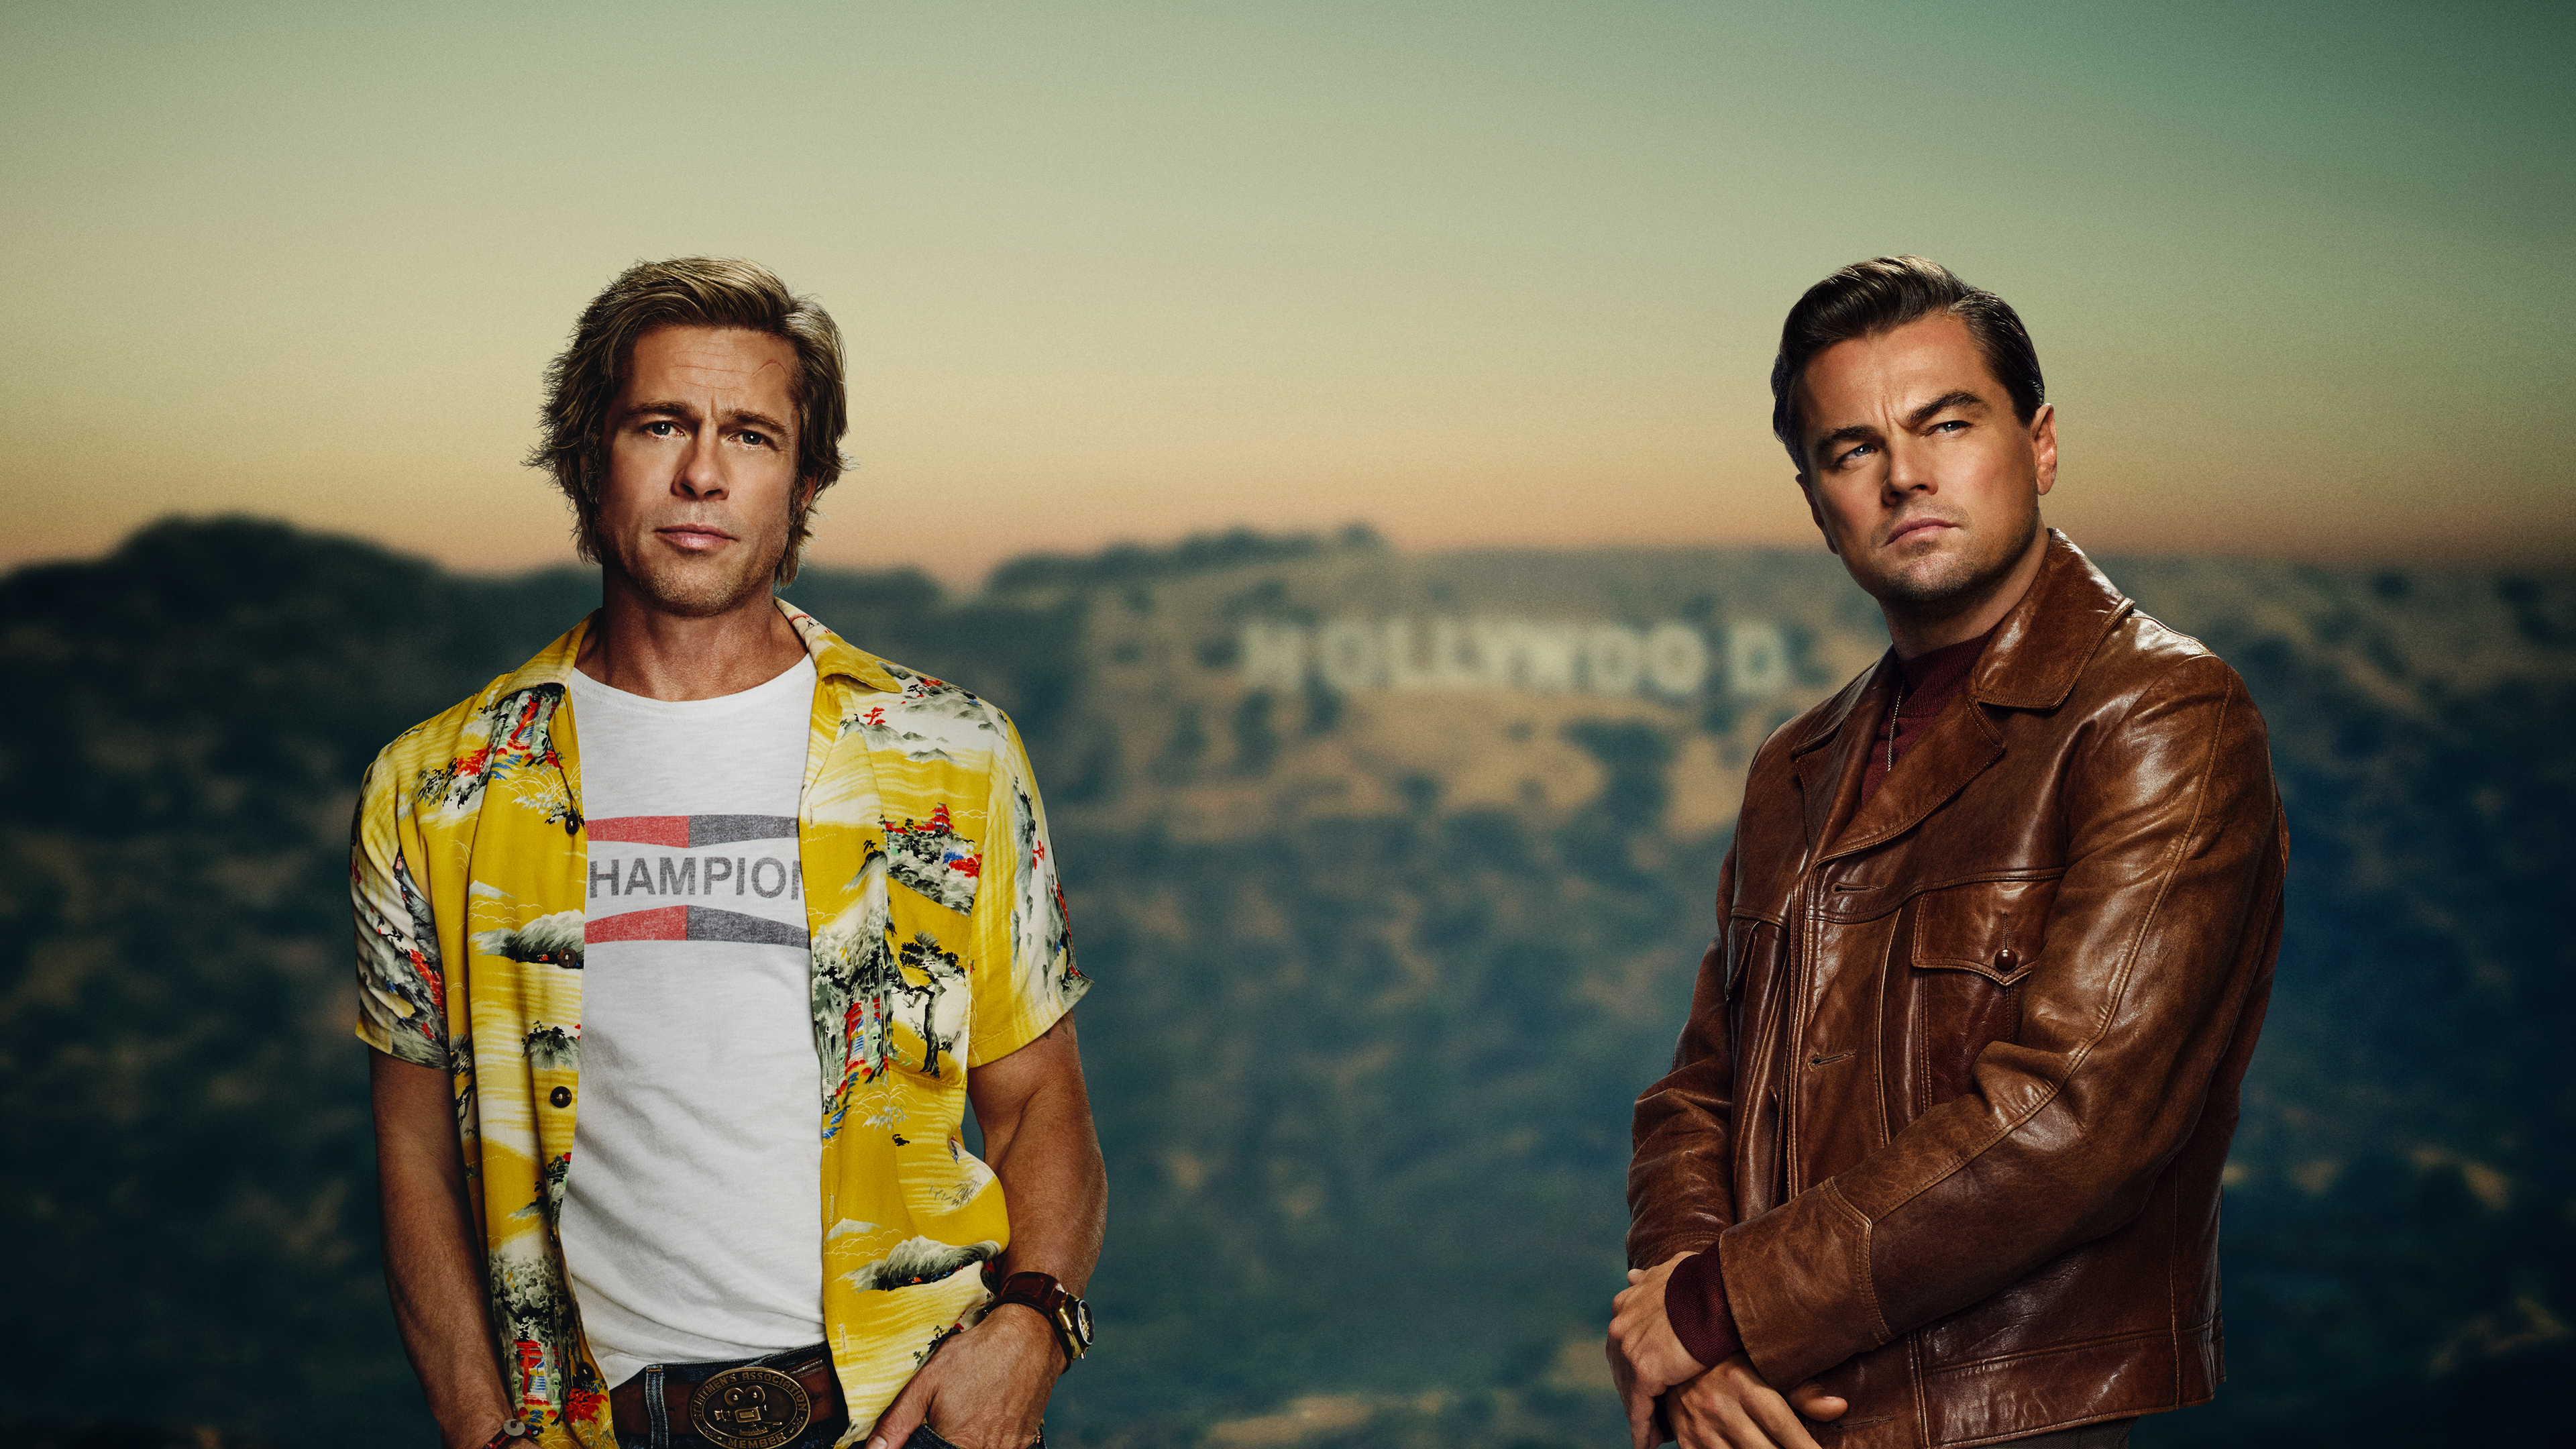 Once Upon A Time In Hollywood 4k Ultra HD Wallpaper